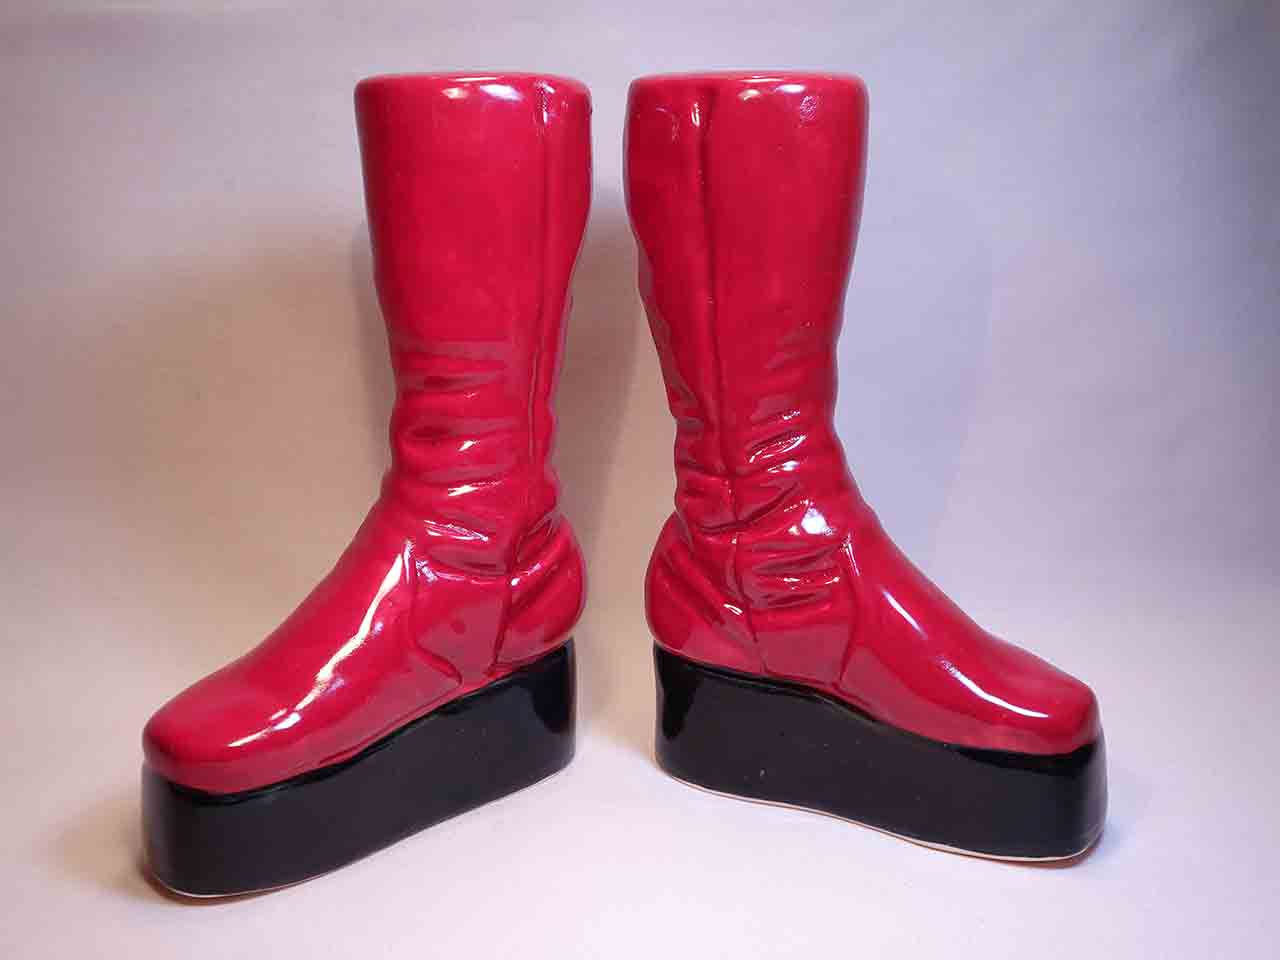 David Bowie's red boots by Gary Seymour